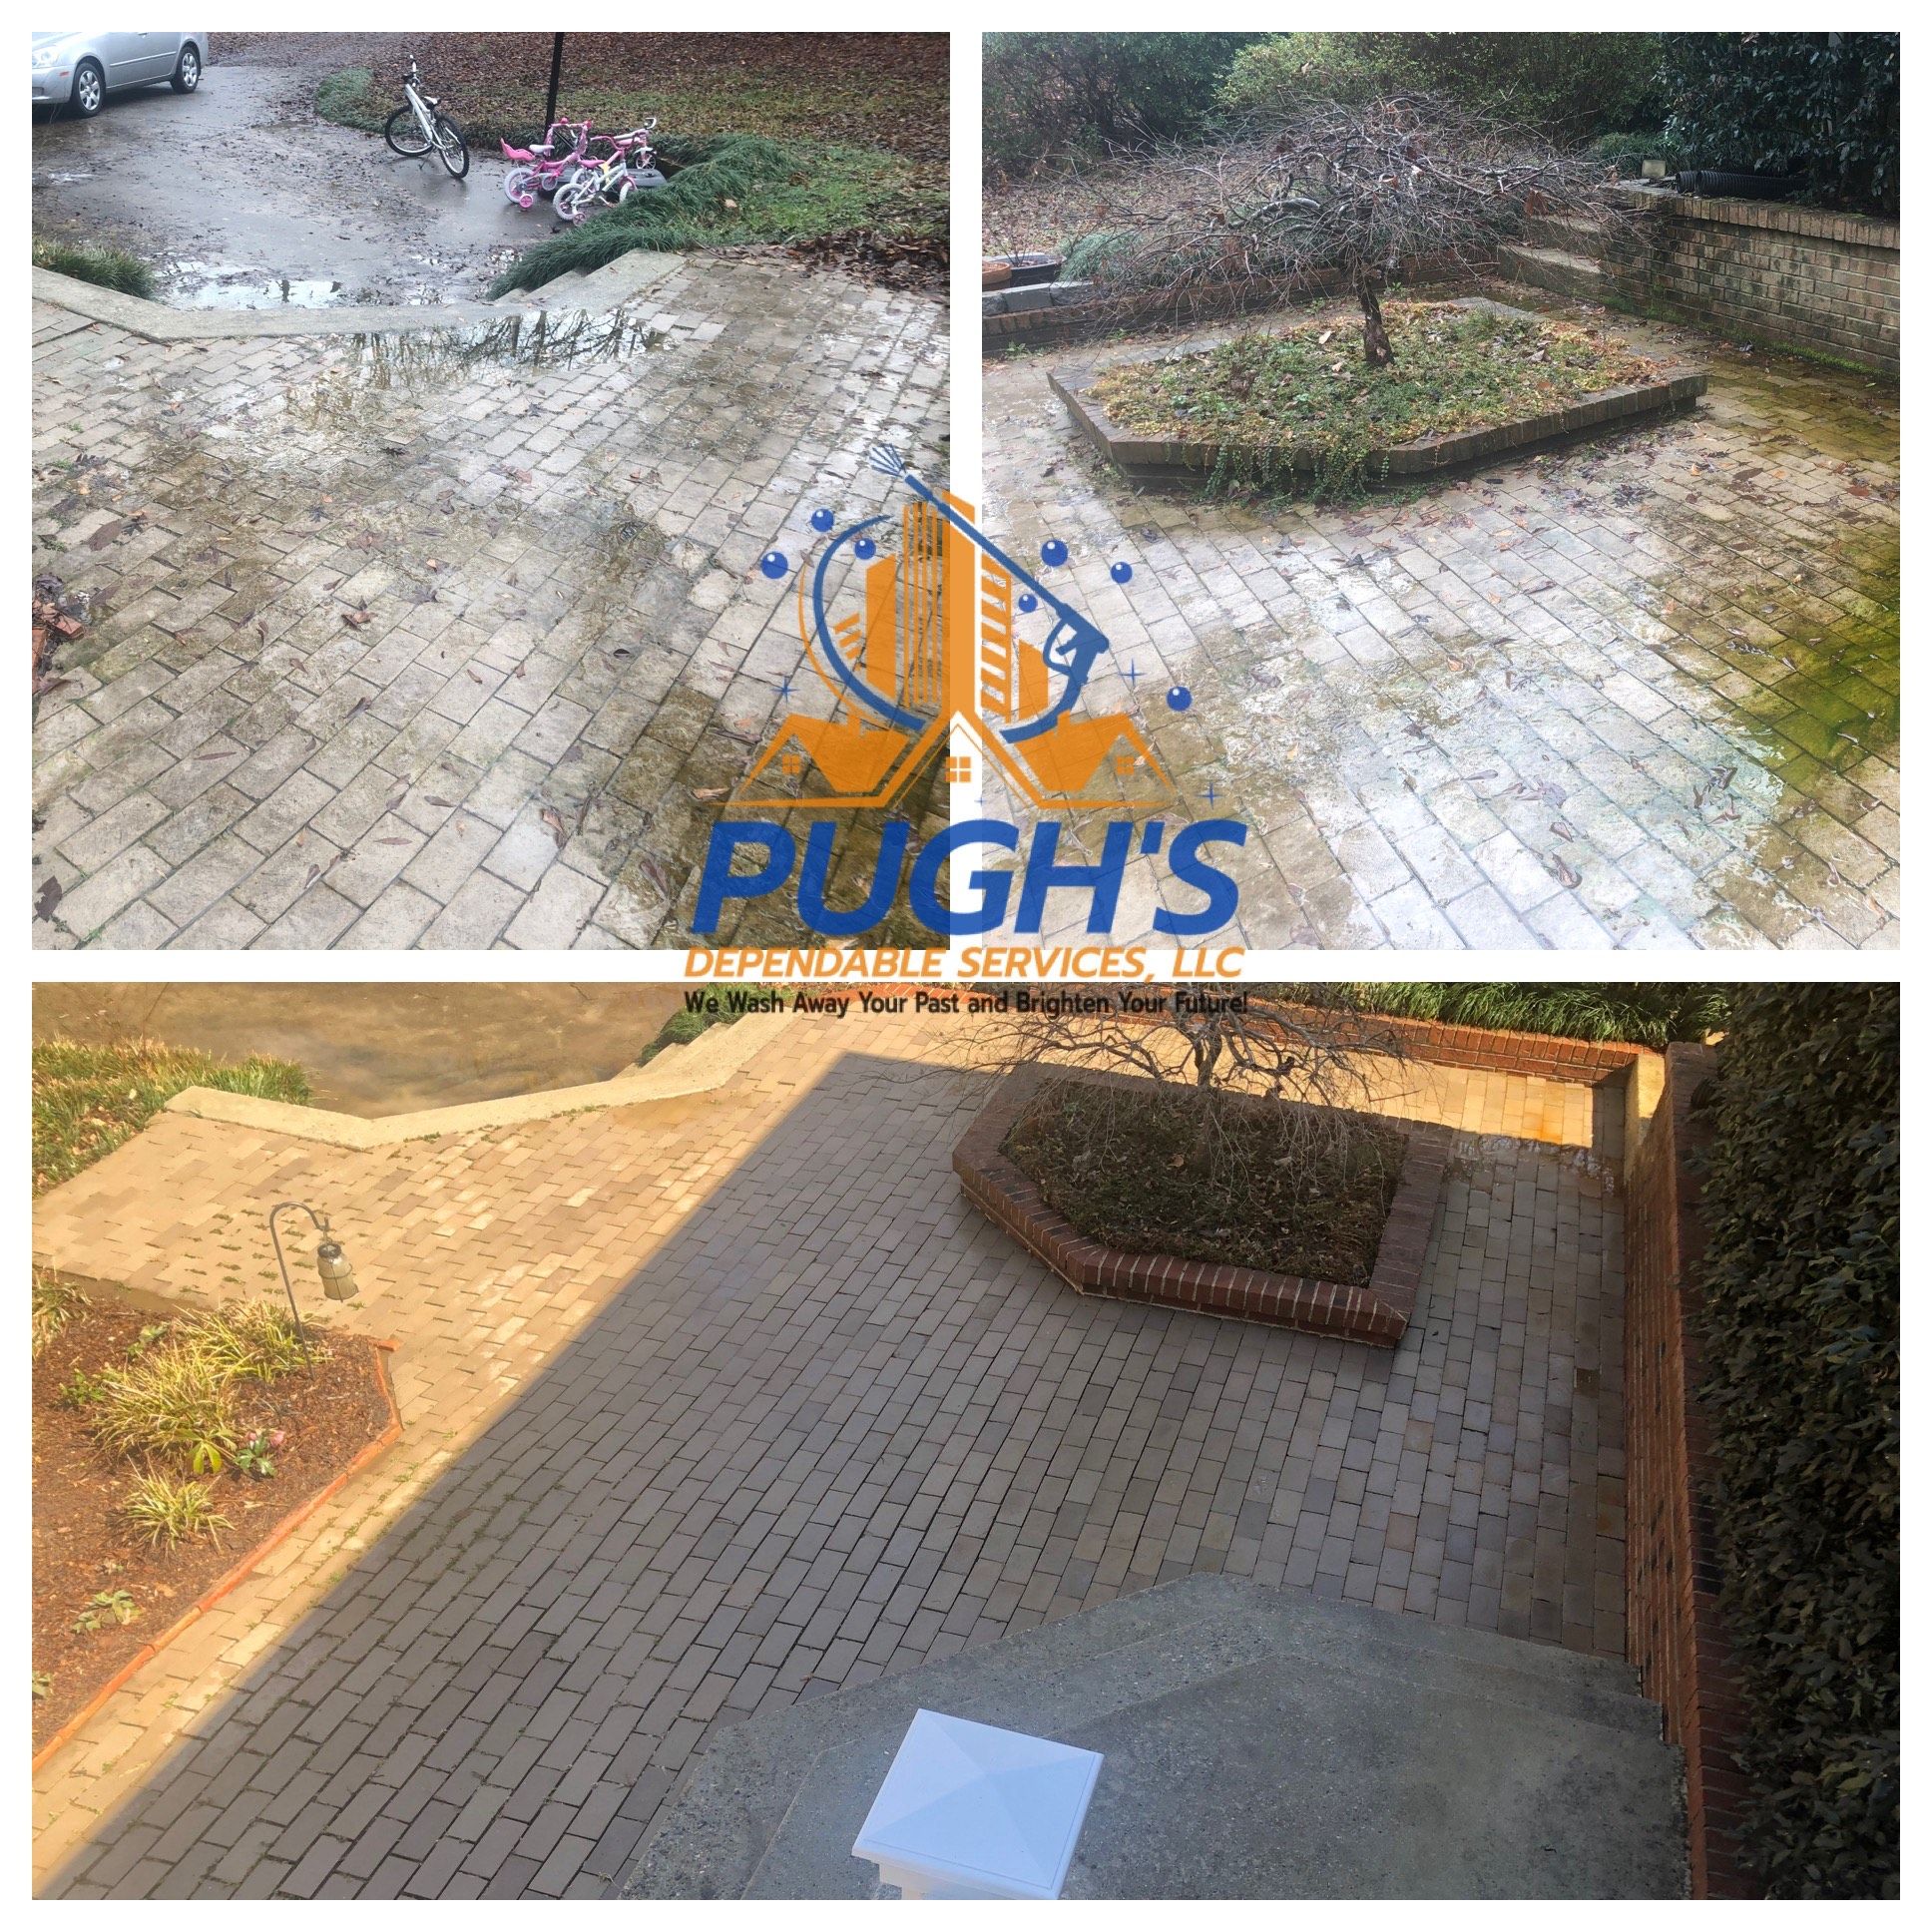 Before / After for Pugh's Dependable Services, L.L.C. in Raleigh, NC